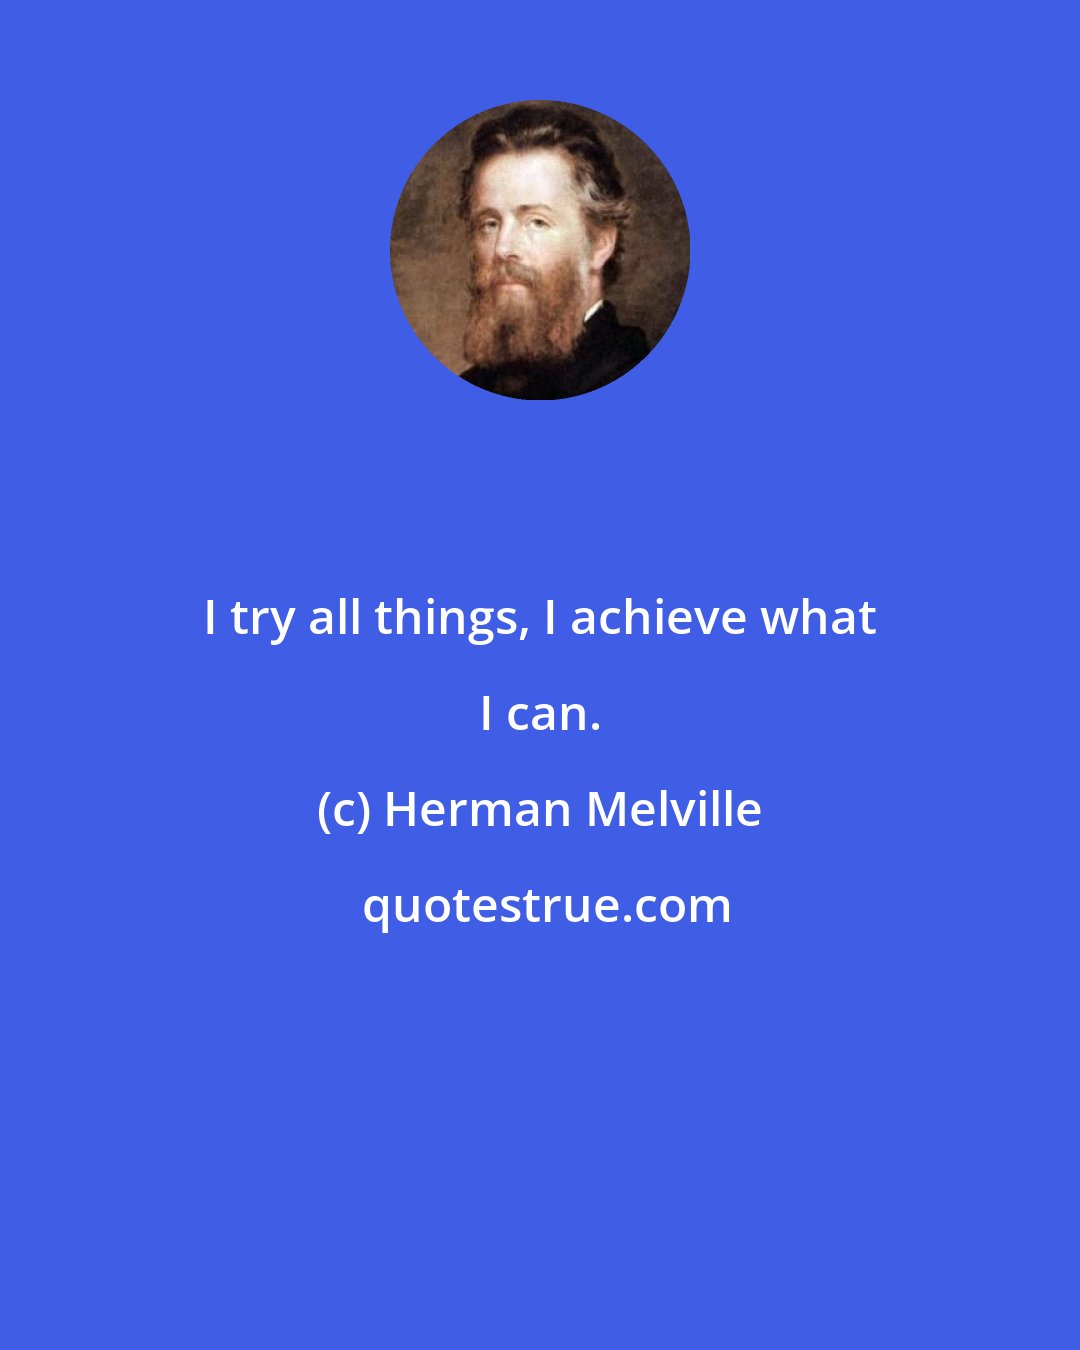 Herman Melville: I try all things, I achieve what I can.